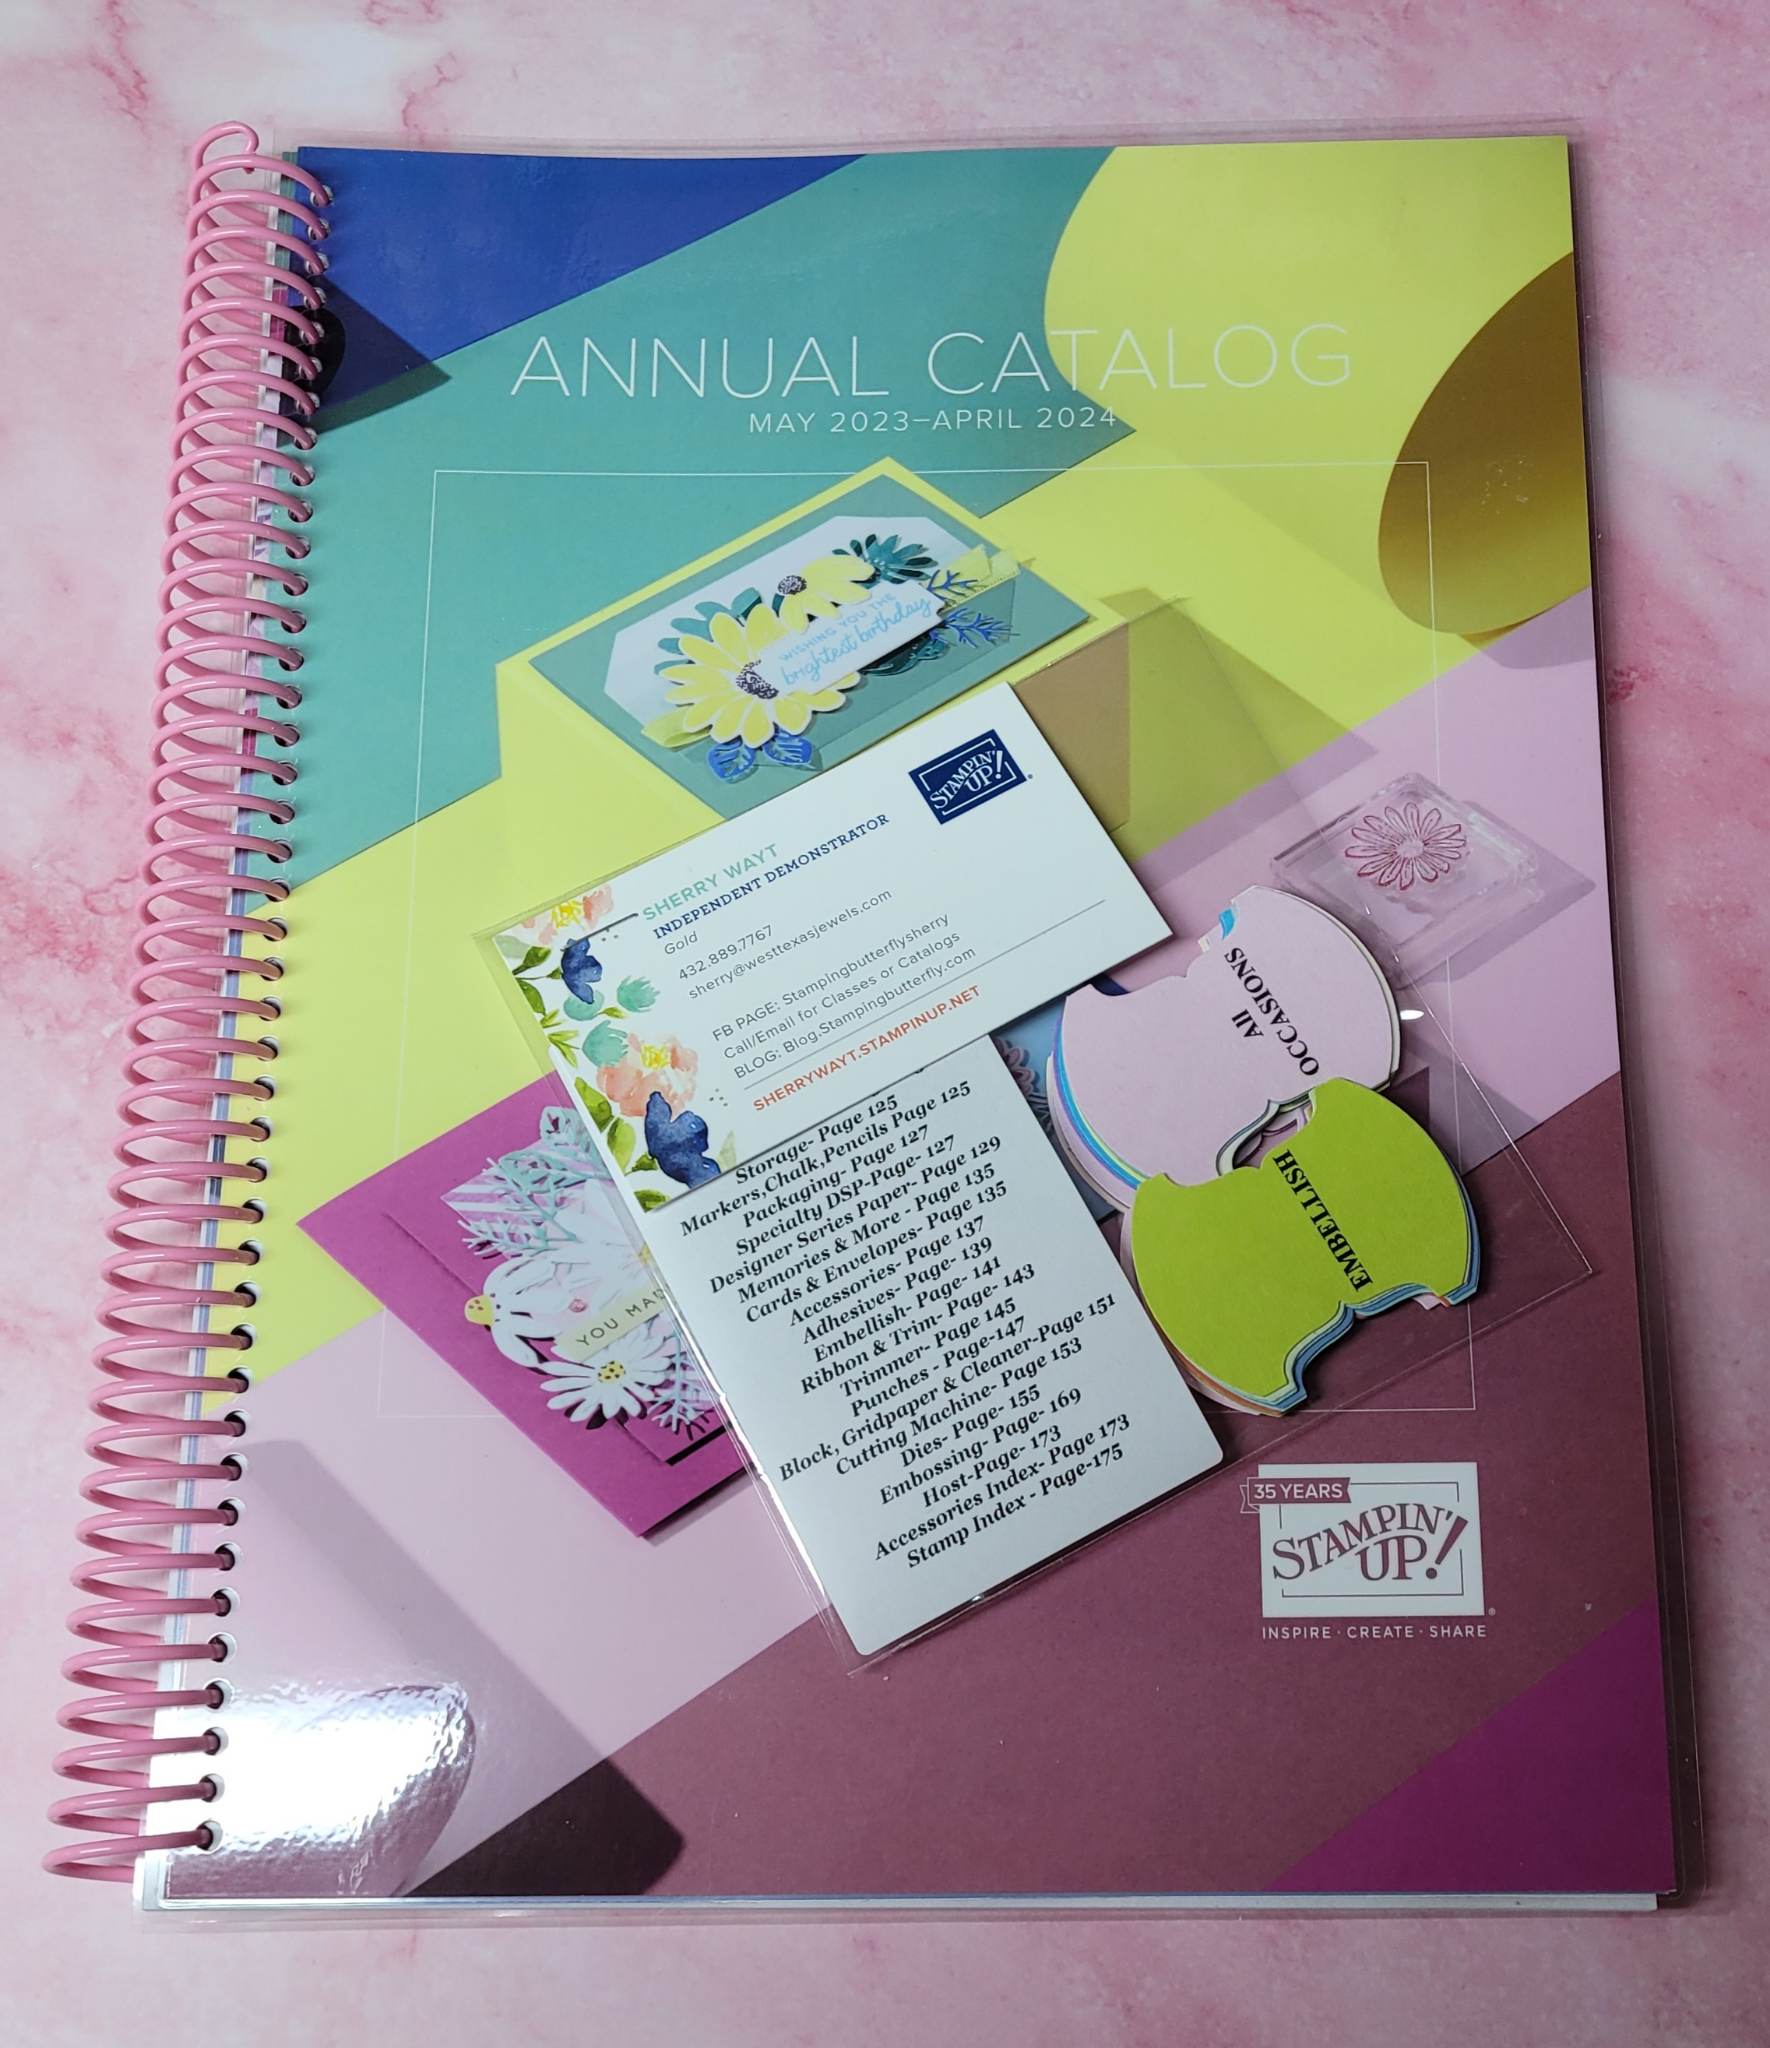 2023-2024 Annual Stampin' Up! Catalog – Spiral Bound With Tabs